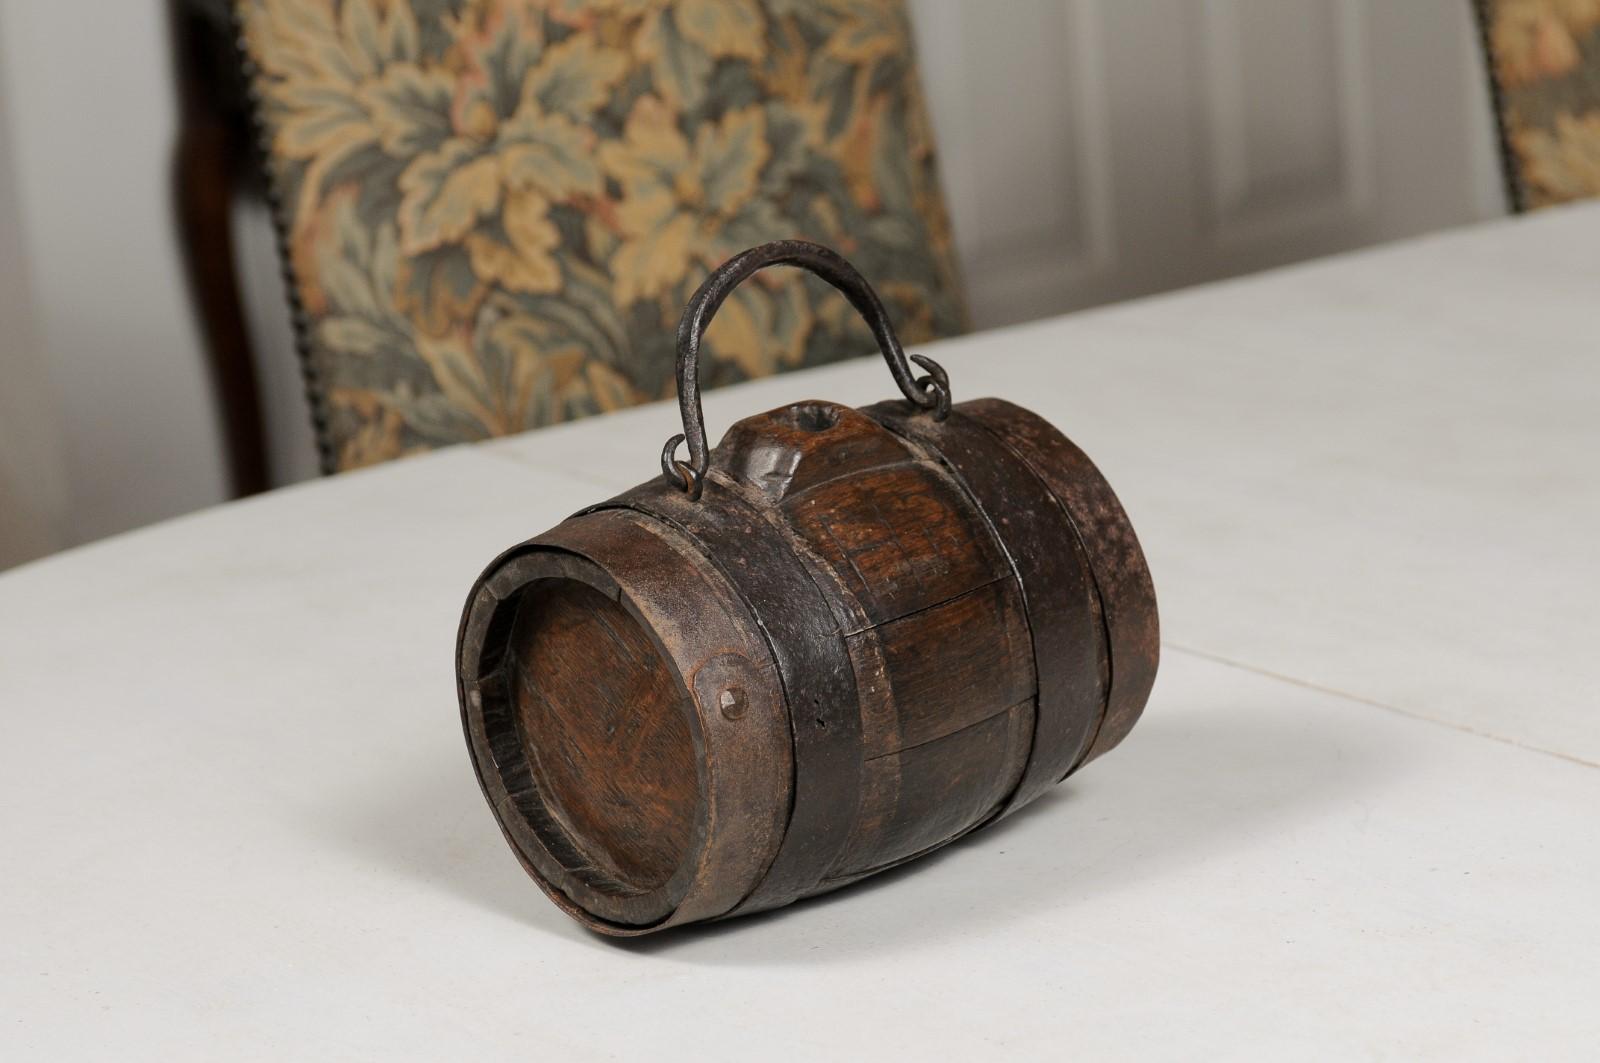 A French petite barrel from the 19th century, with iron handle and accents. Created in France during the 19th century, this decorative barrel charms us with its petite proportions and nicely rustic appearance. Showcasing a brown slatted structure